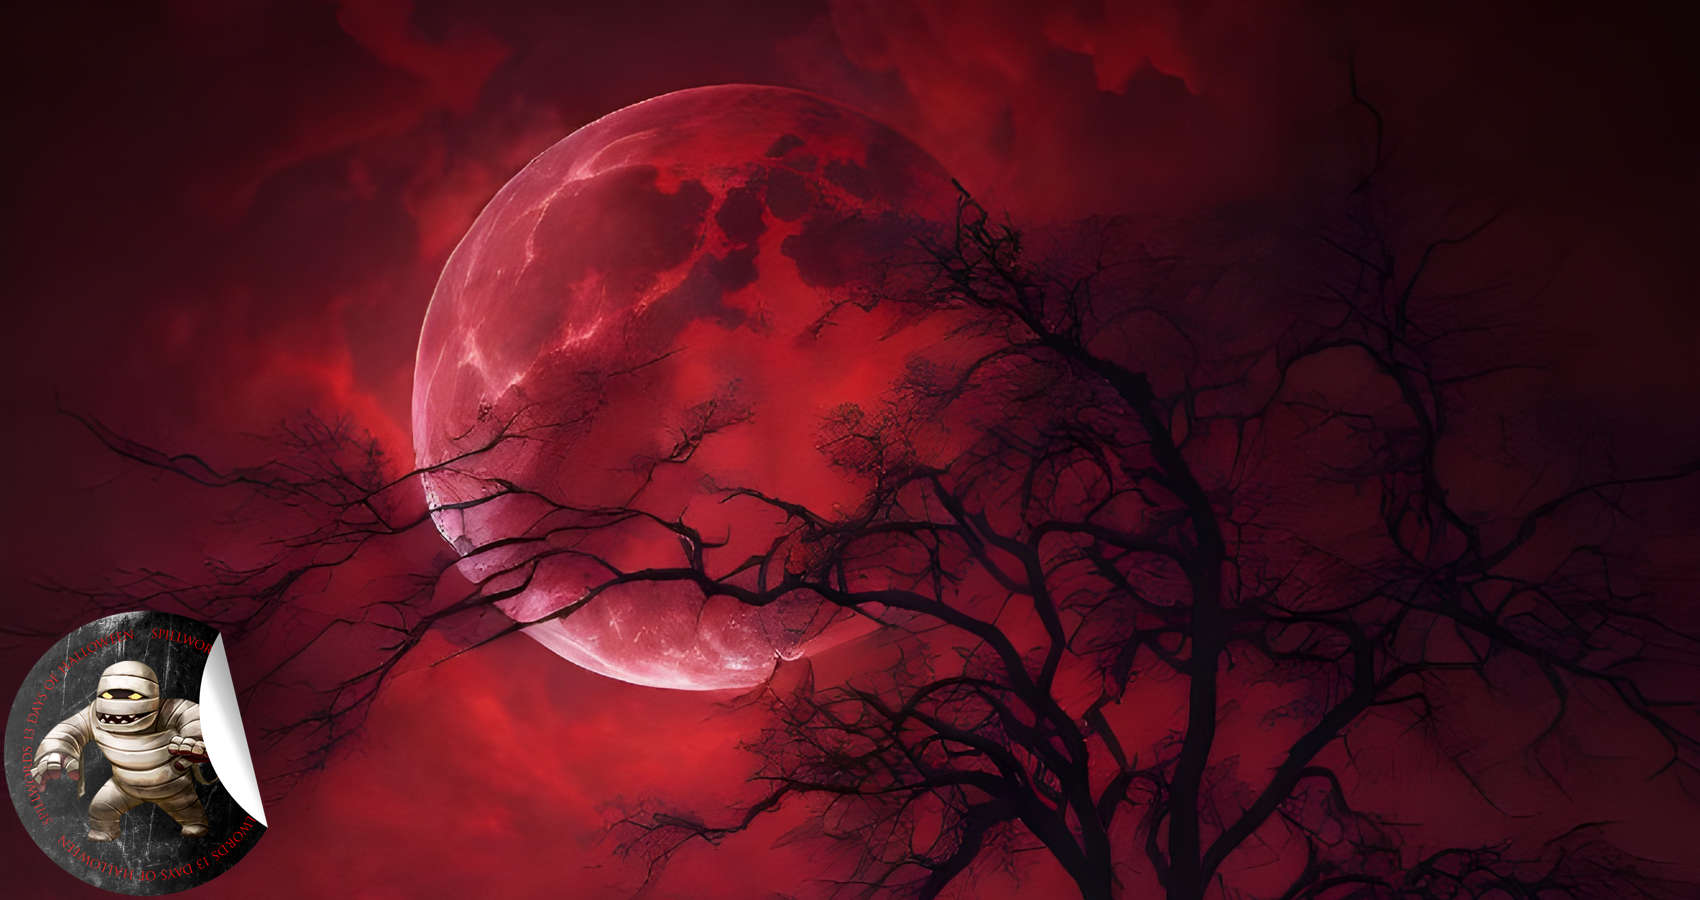 Blood Moon, a short story by Aaron Grierson at Spillwords.com